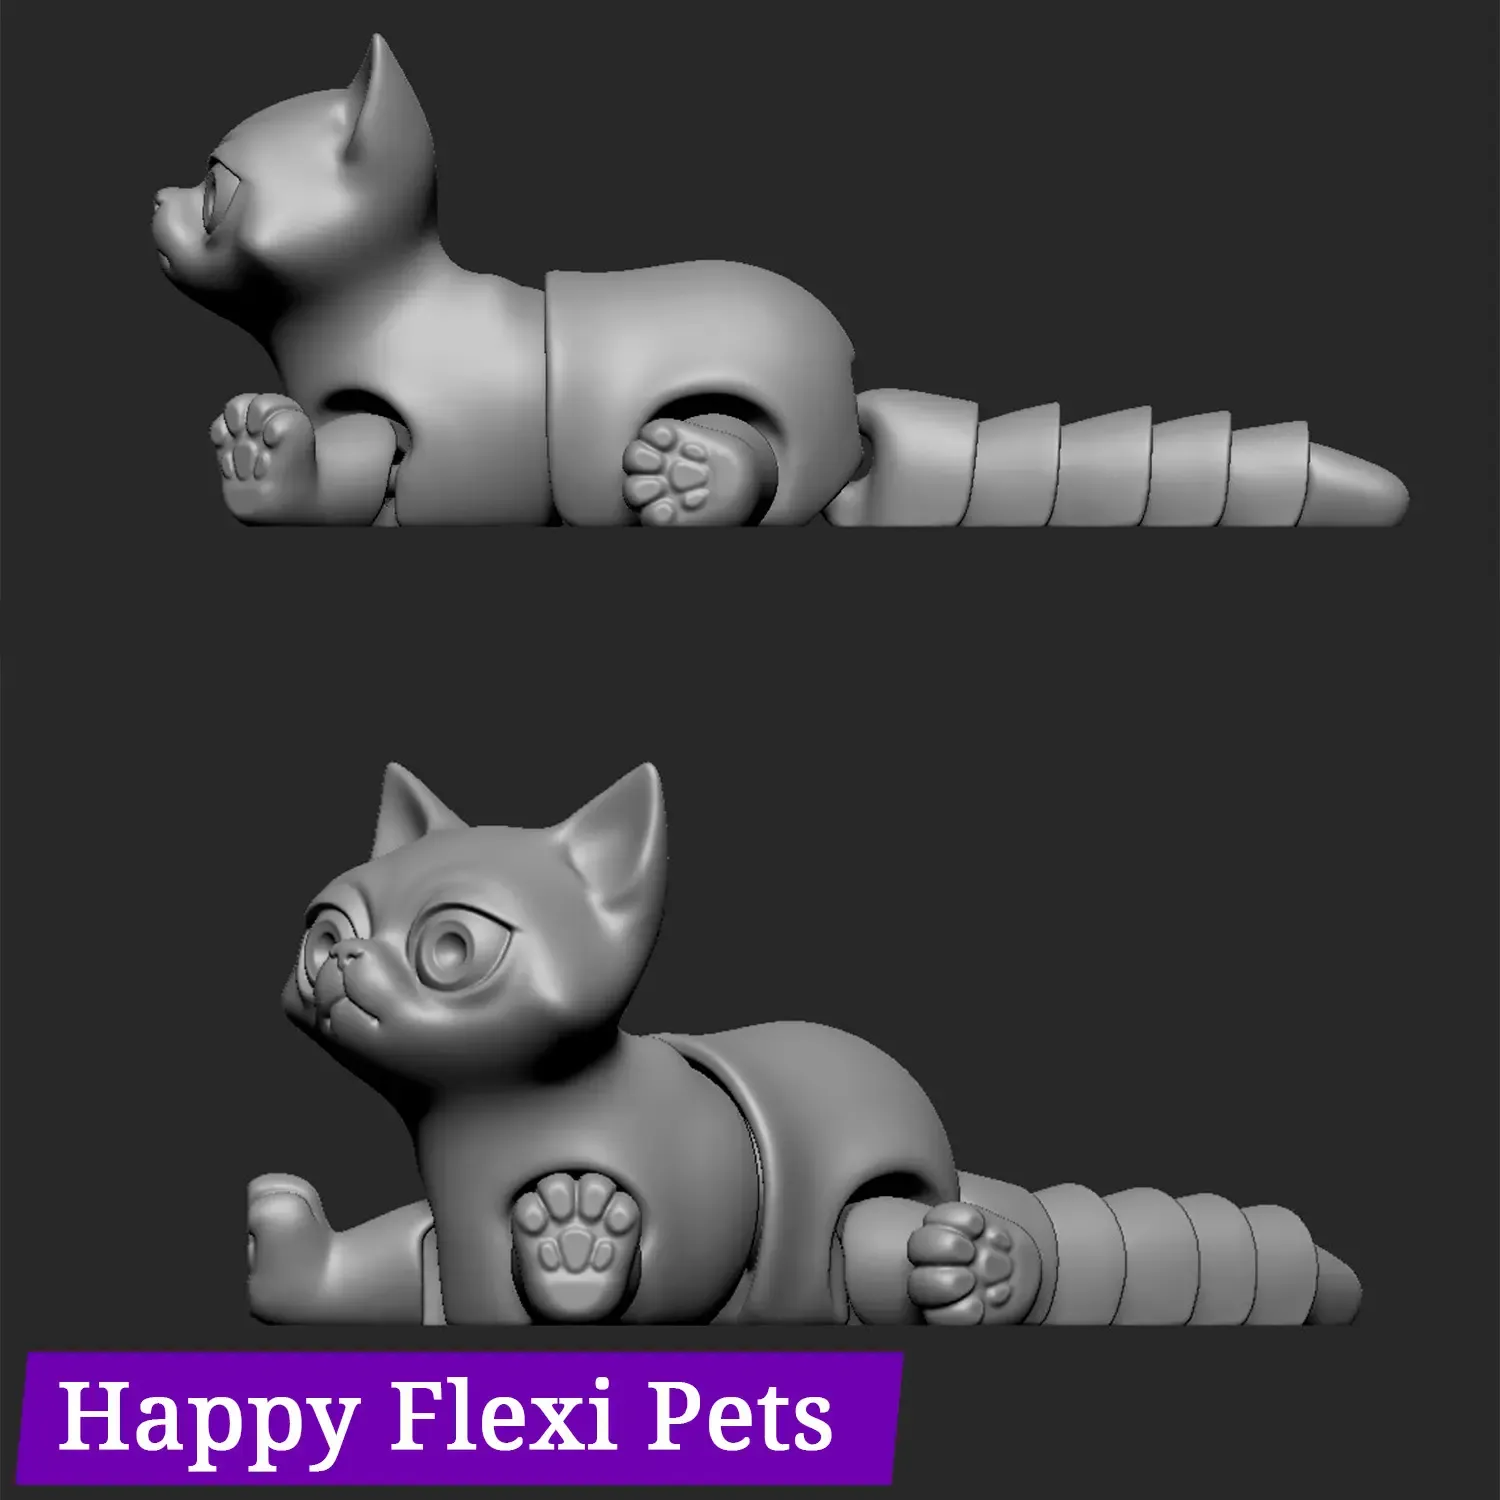 Busya the she cat print in place flexi toy